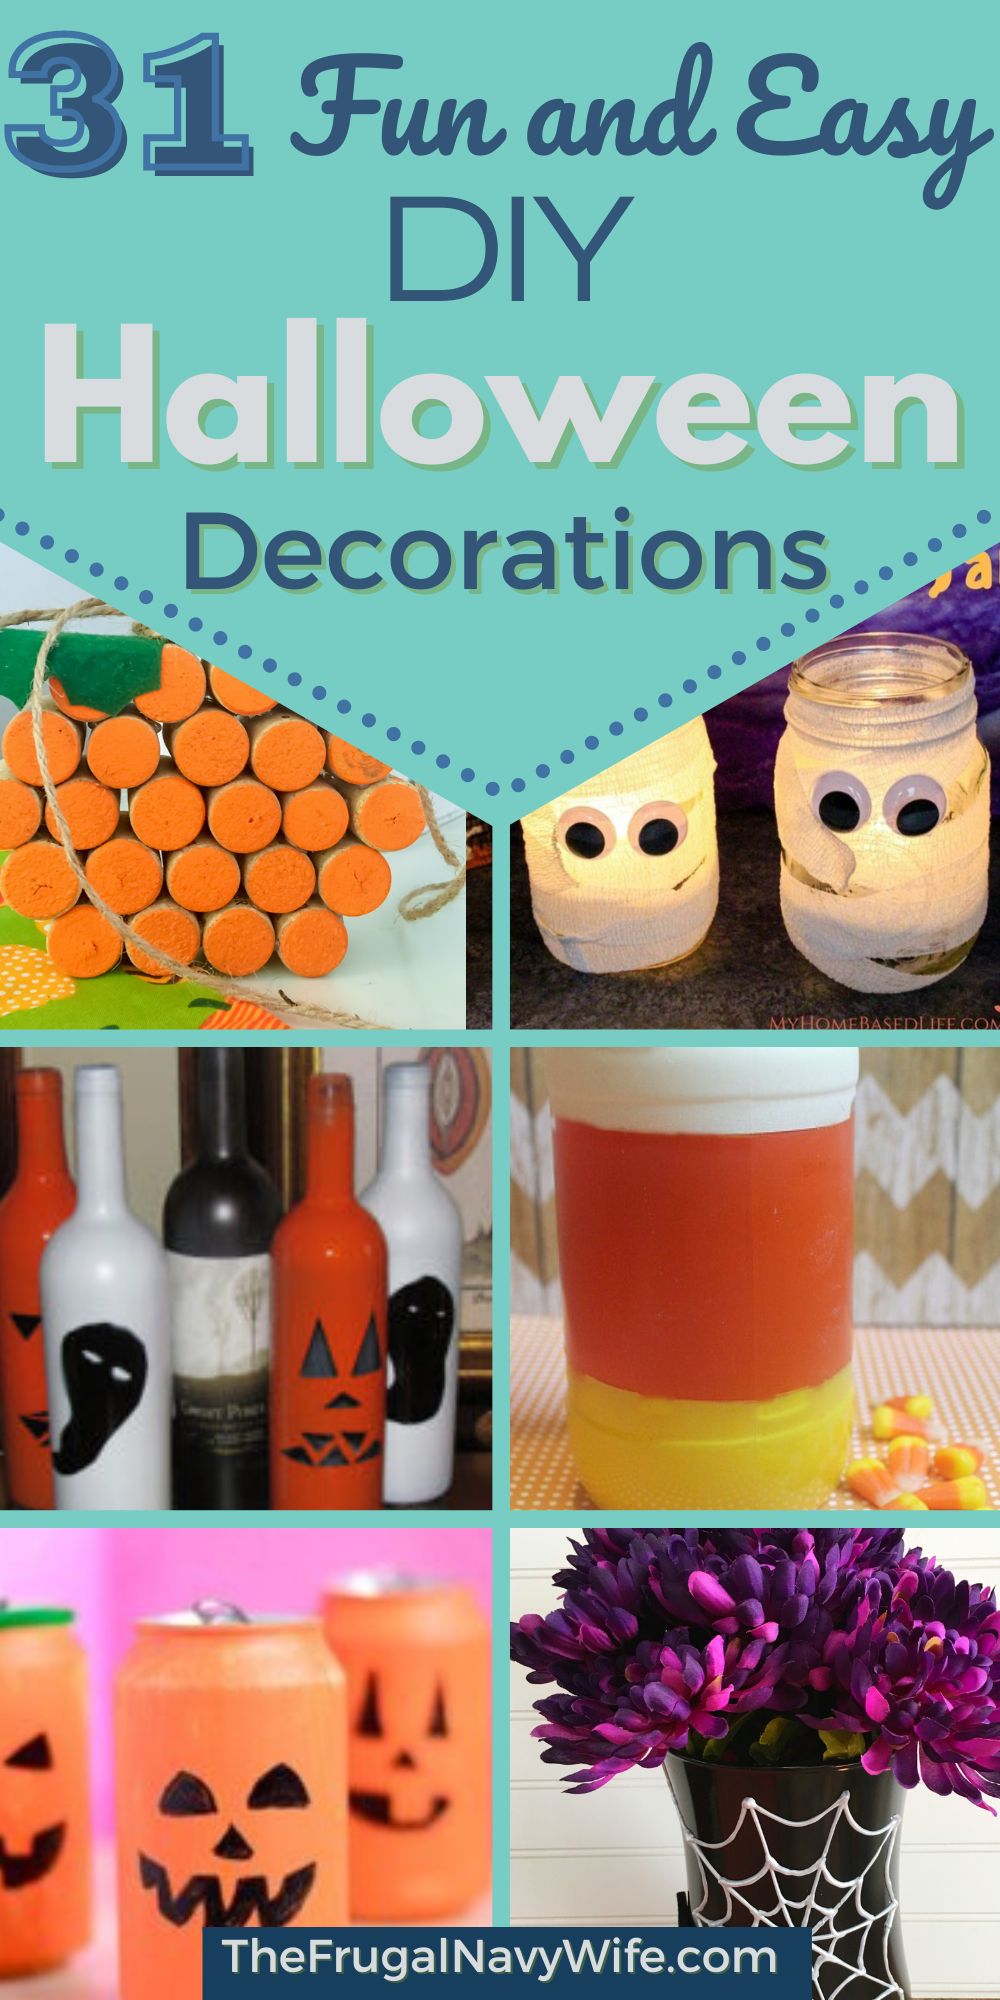 31 Fun and Easy DIY Halloween Decorations | The Frugal Navy Wife